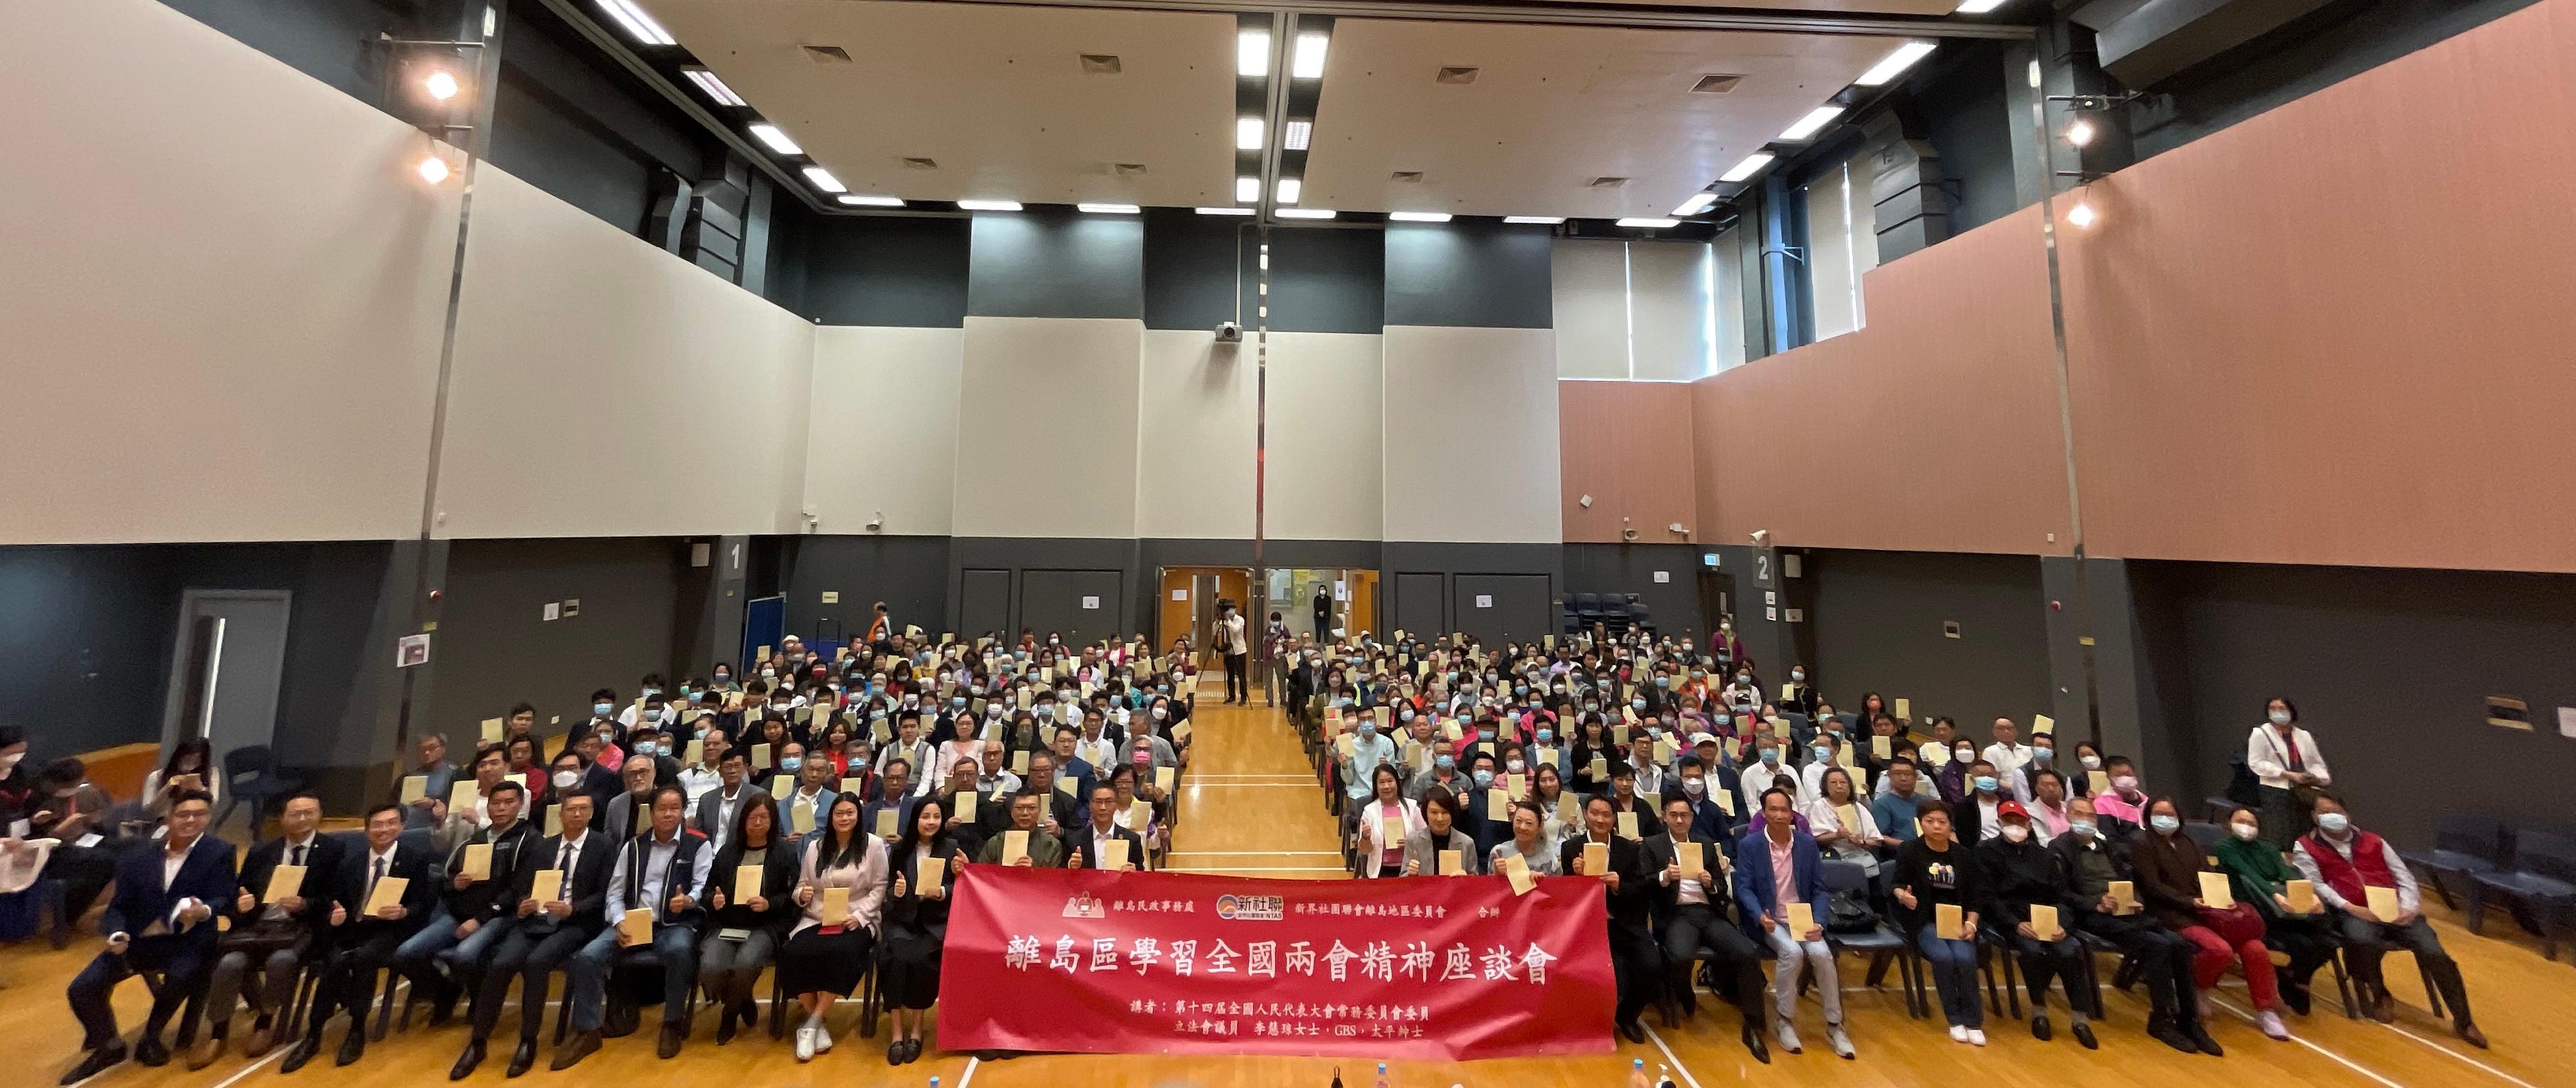 District Offices have held seminars on "Spirit of the 'two sessions'" to study the essentials of the "two sessions" this year and its important guidance for Hong Kong's future development. The Islands District Office, together with the New Territories Association of Societies Islands District Committee, held a seminar on "Spirit of the 'two sessions'" on April 3 at Tung Chung Community Hall. Photo shows guests and participants at the seminar.